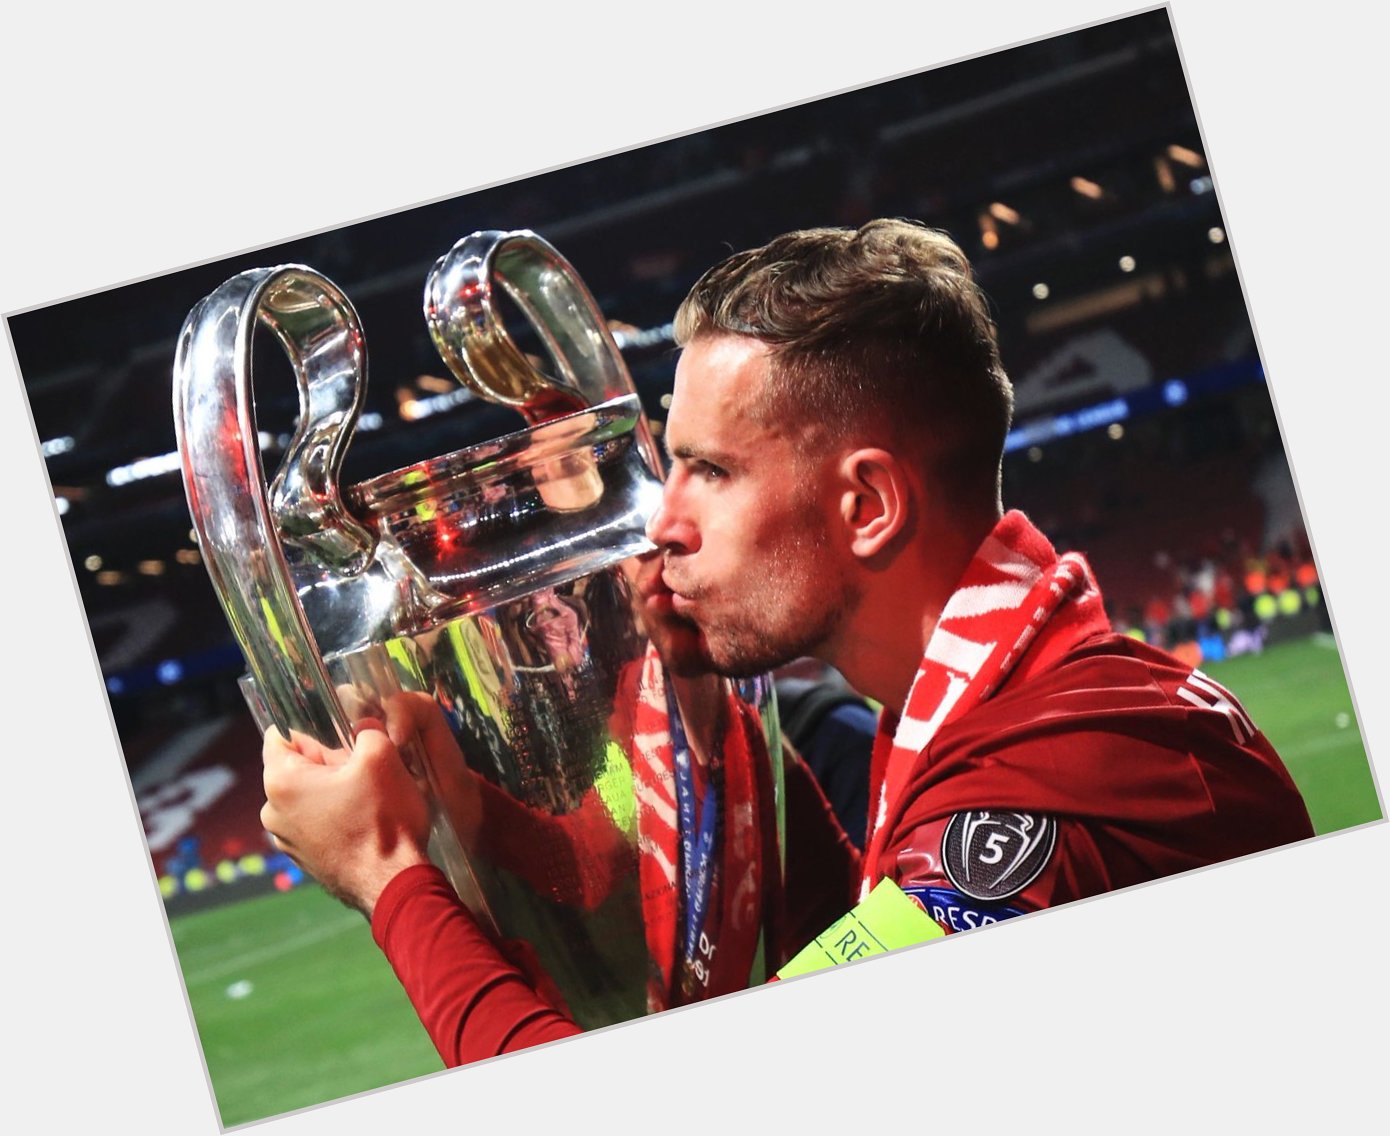 Happy birthday to our Champions League winning captain, Jordan Henderson!

Have a great day skipper! 